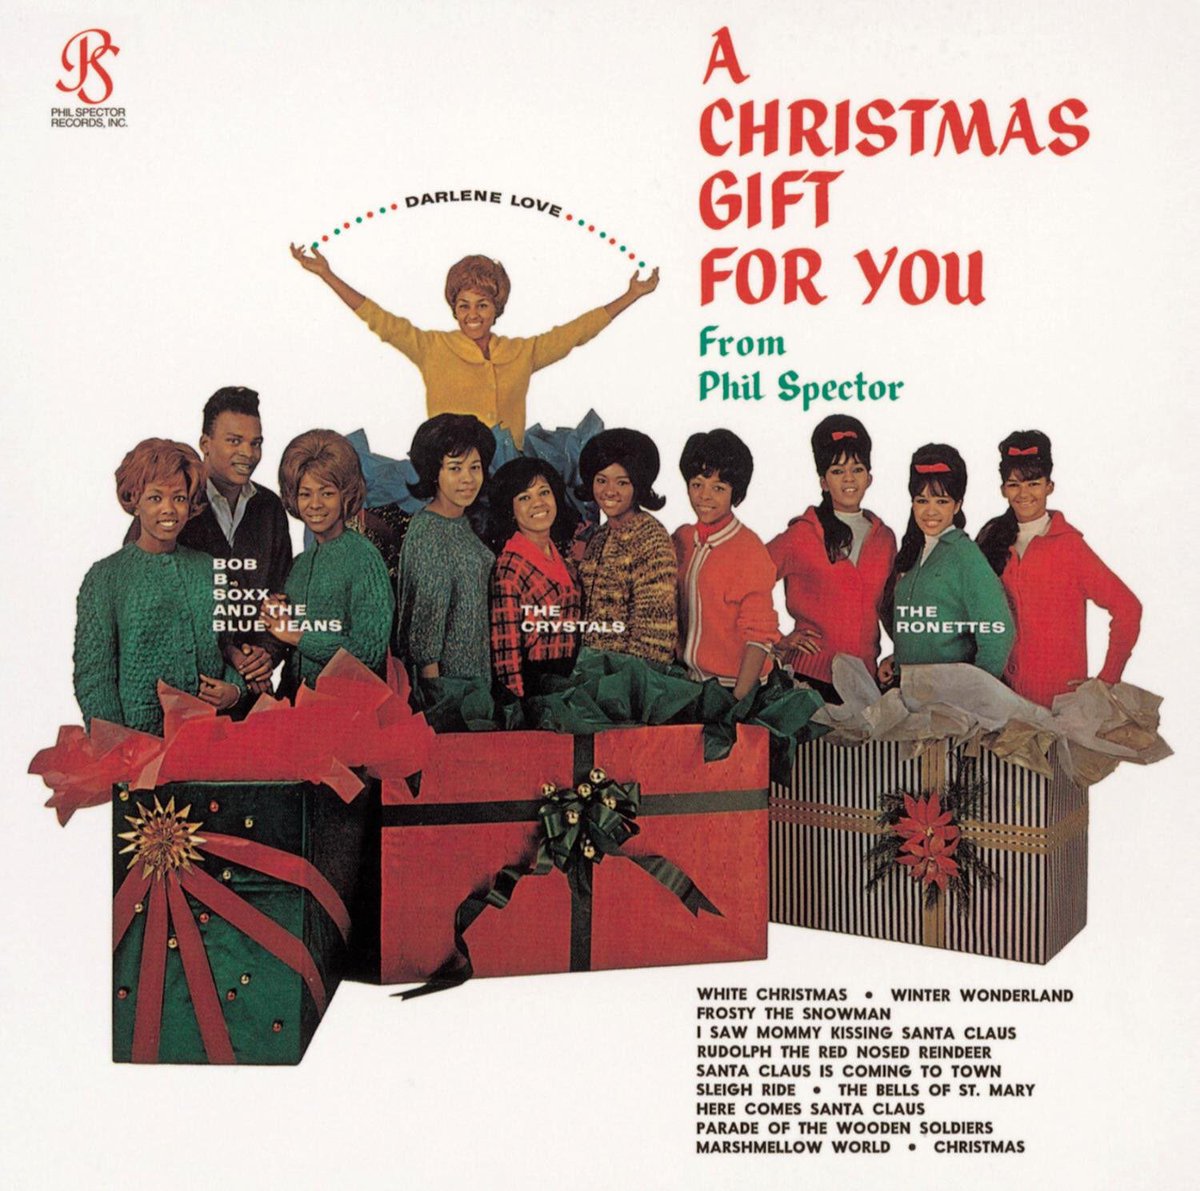 This album is everything. ❤️ #AChristmasGiftForYou #PhilSpector #DarleneLove #BobBSoxxandTheBlueJeans #TheCrystals #TheRonettes #Sixties #Christmas #Christmas2021 #ChristmasMusic